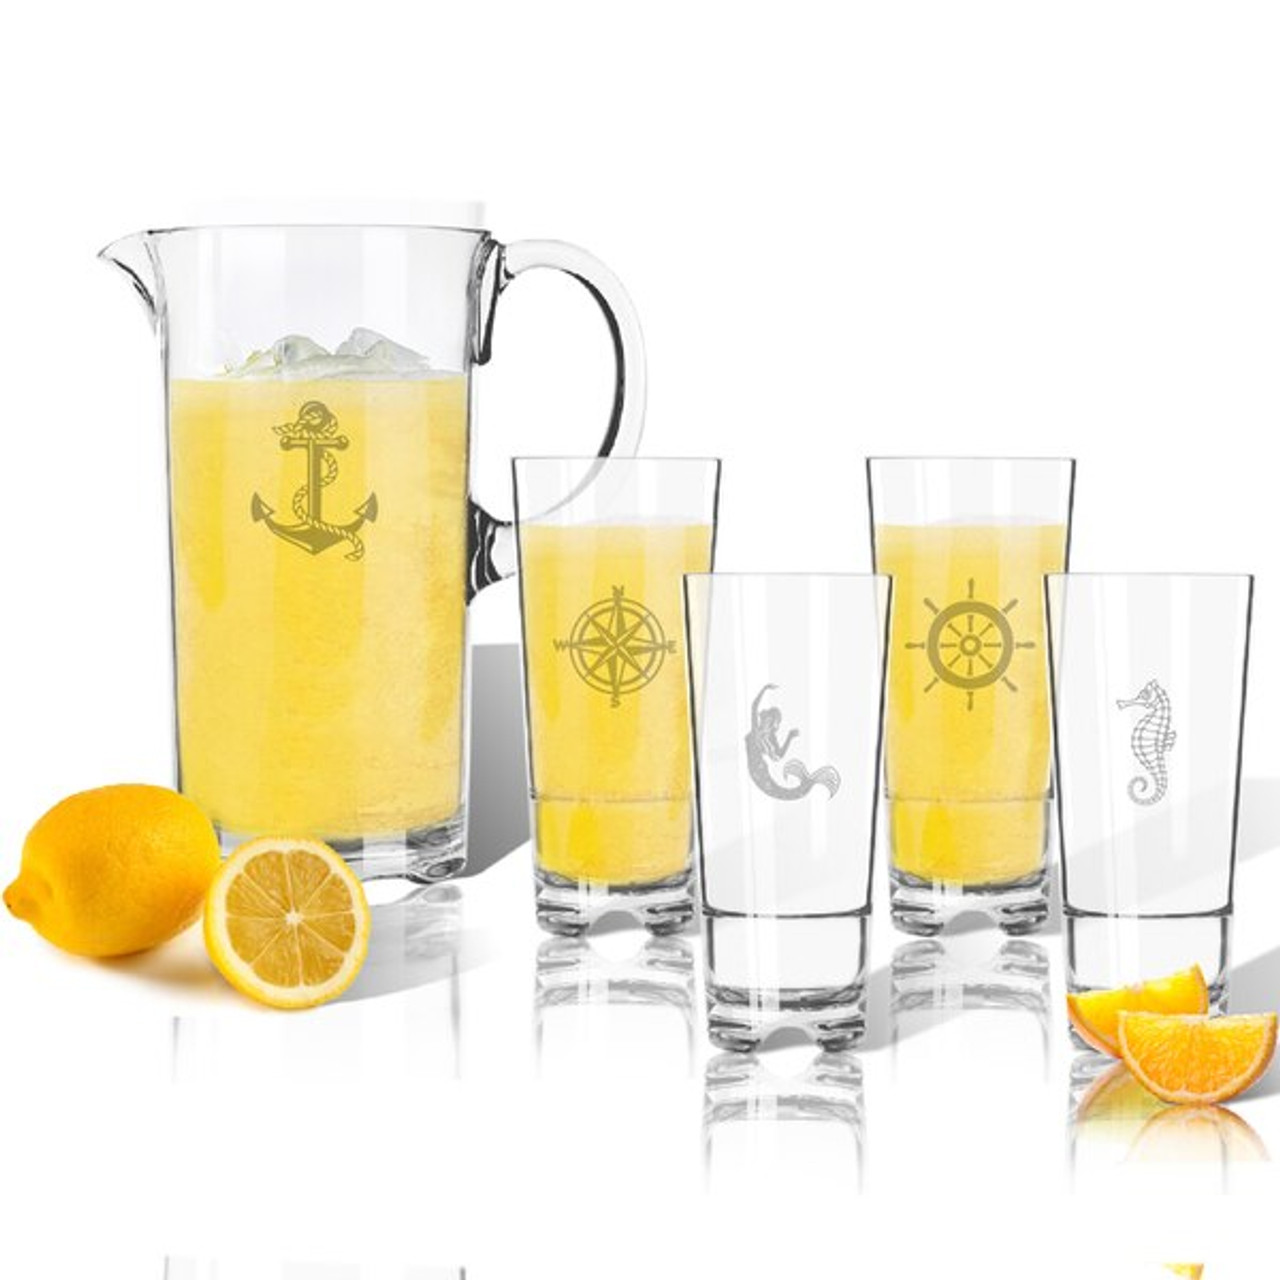 https://cdn11.bigcommerce.com/s-97fac/images/stencil/1280x1280/products/129275/197734/entertaining-set-unbreakable-pitcher-and-four-highball-glasses-nautical-21__54589.1515699775__32889.1610393499.jpg?c=2